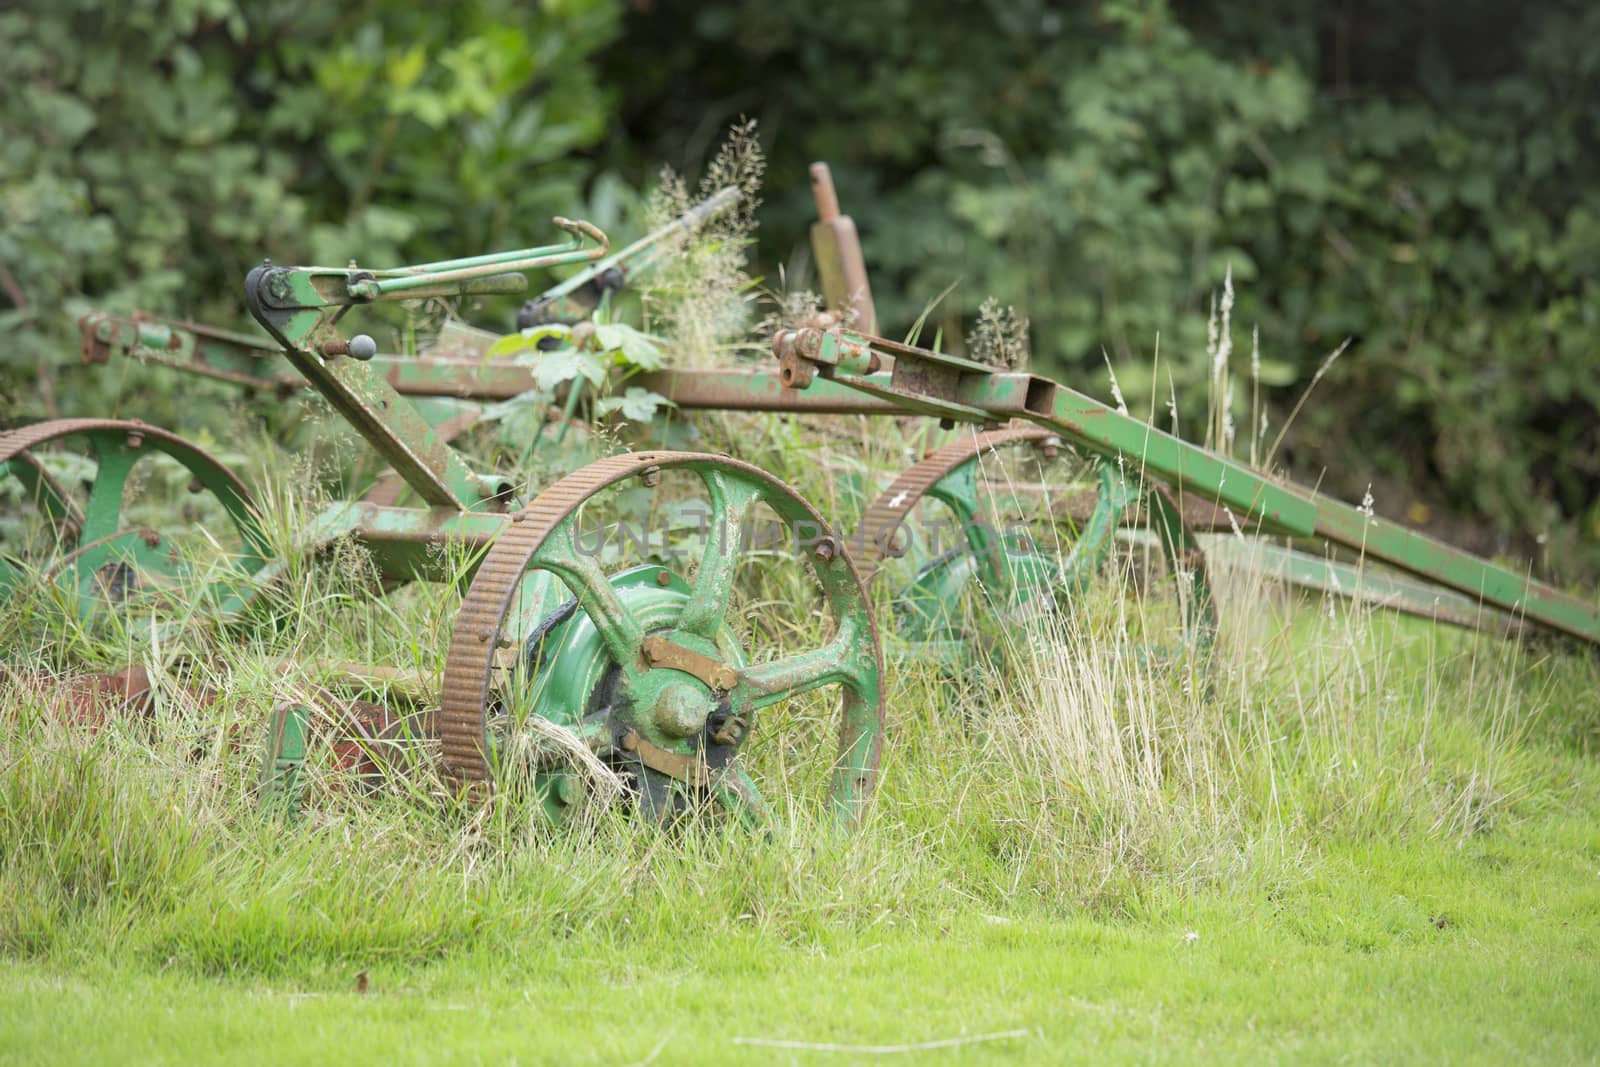 An old pull along Lawn Mower by mattkusb